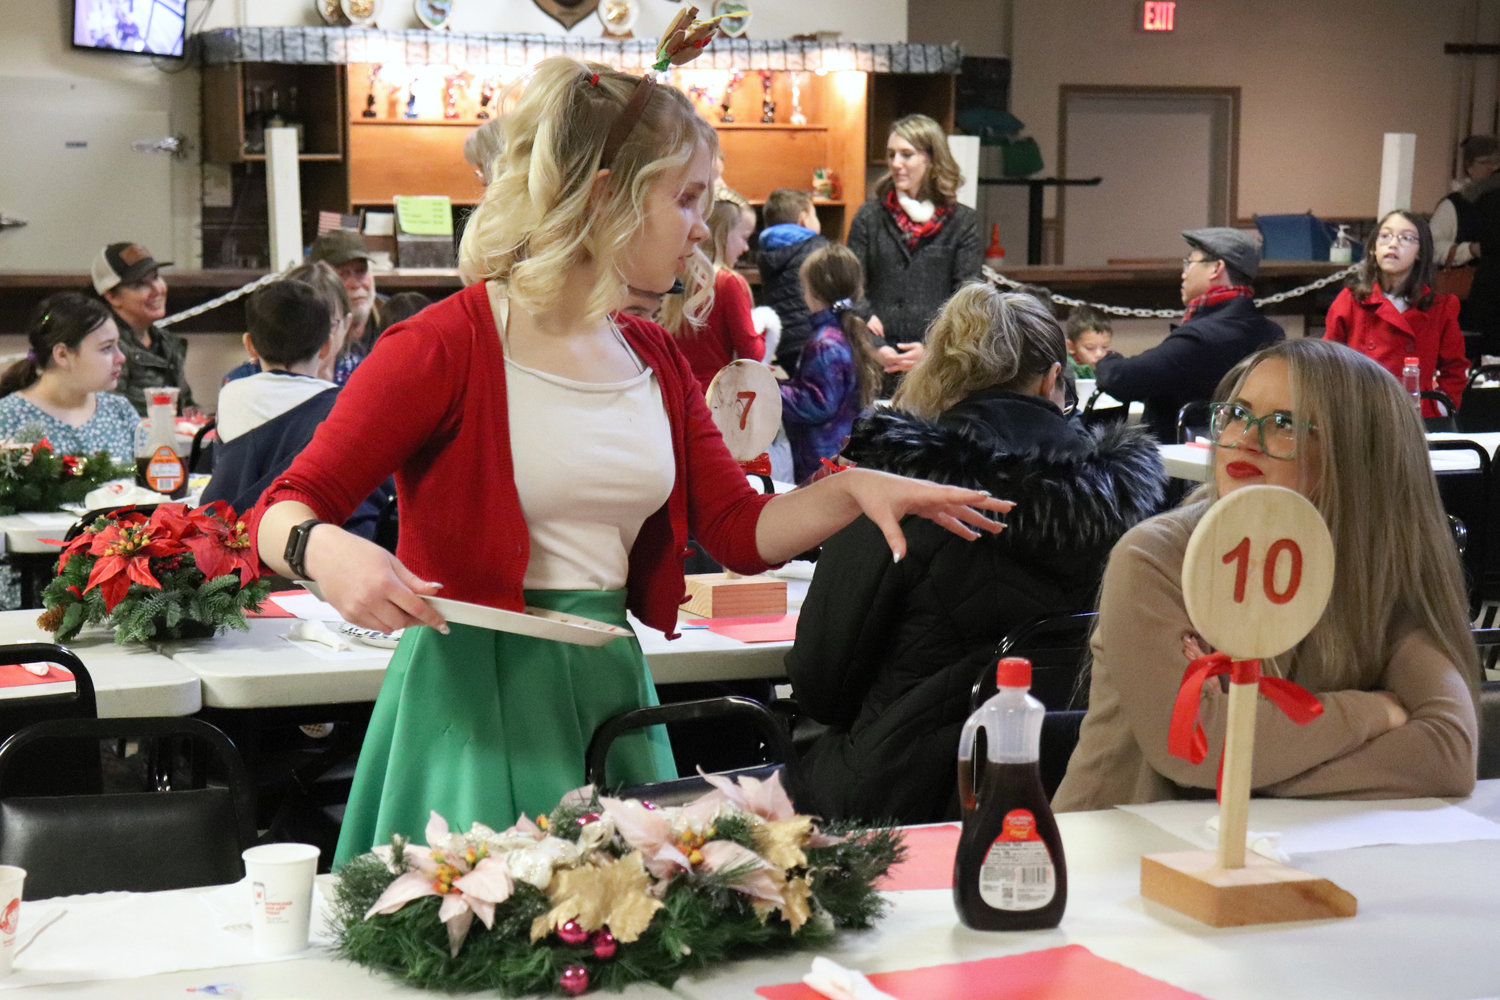 Volunteers serve plates of pancakes, scrambled eggs, sausage and applesauce during a Breakfast with Santa event at the Moose Family Center in Centralia on Saturday.